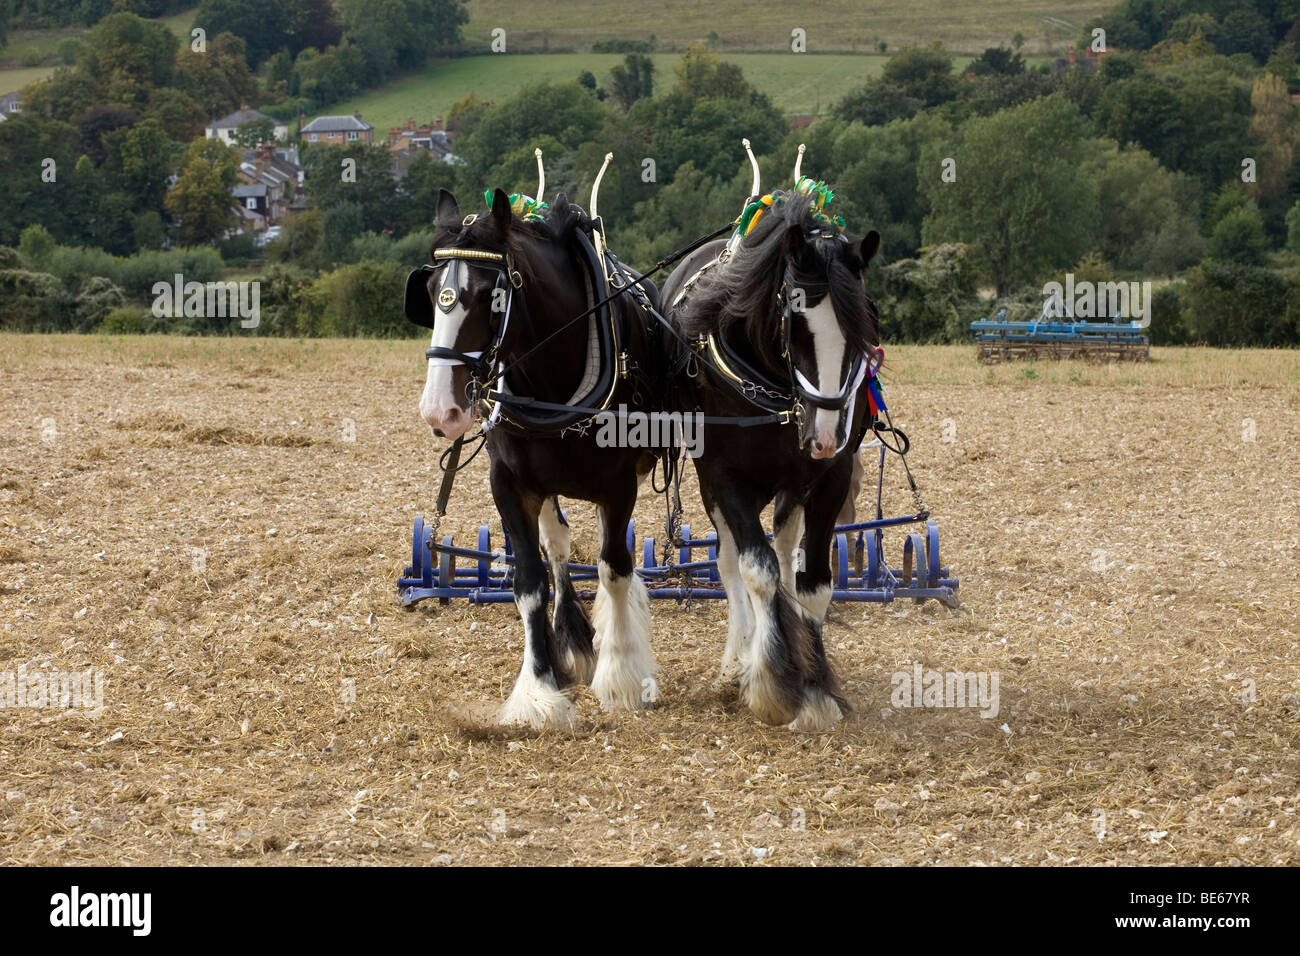 Two shire horses pulling a plough, UK. Stock Photo